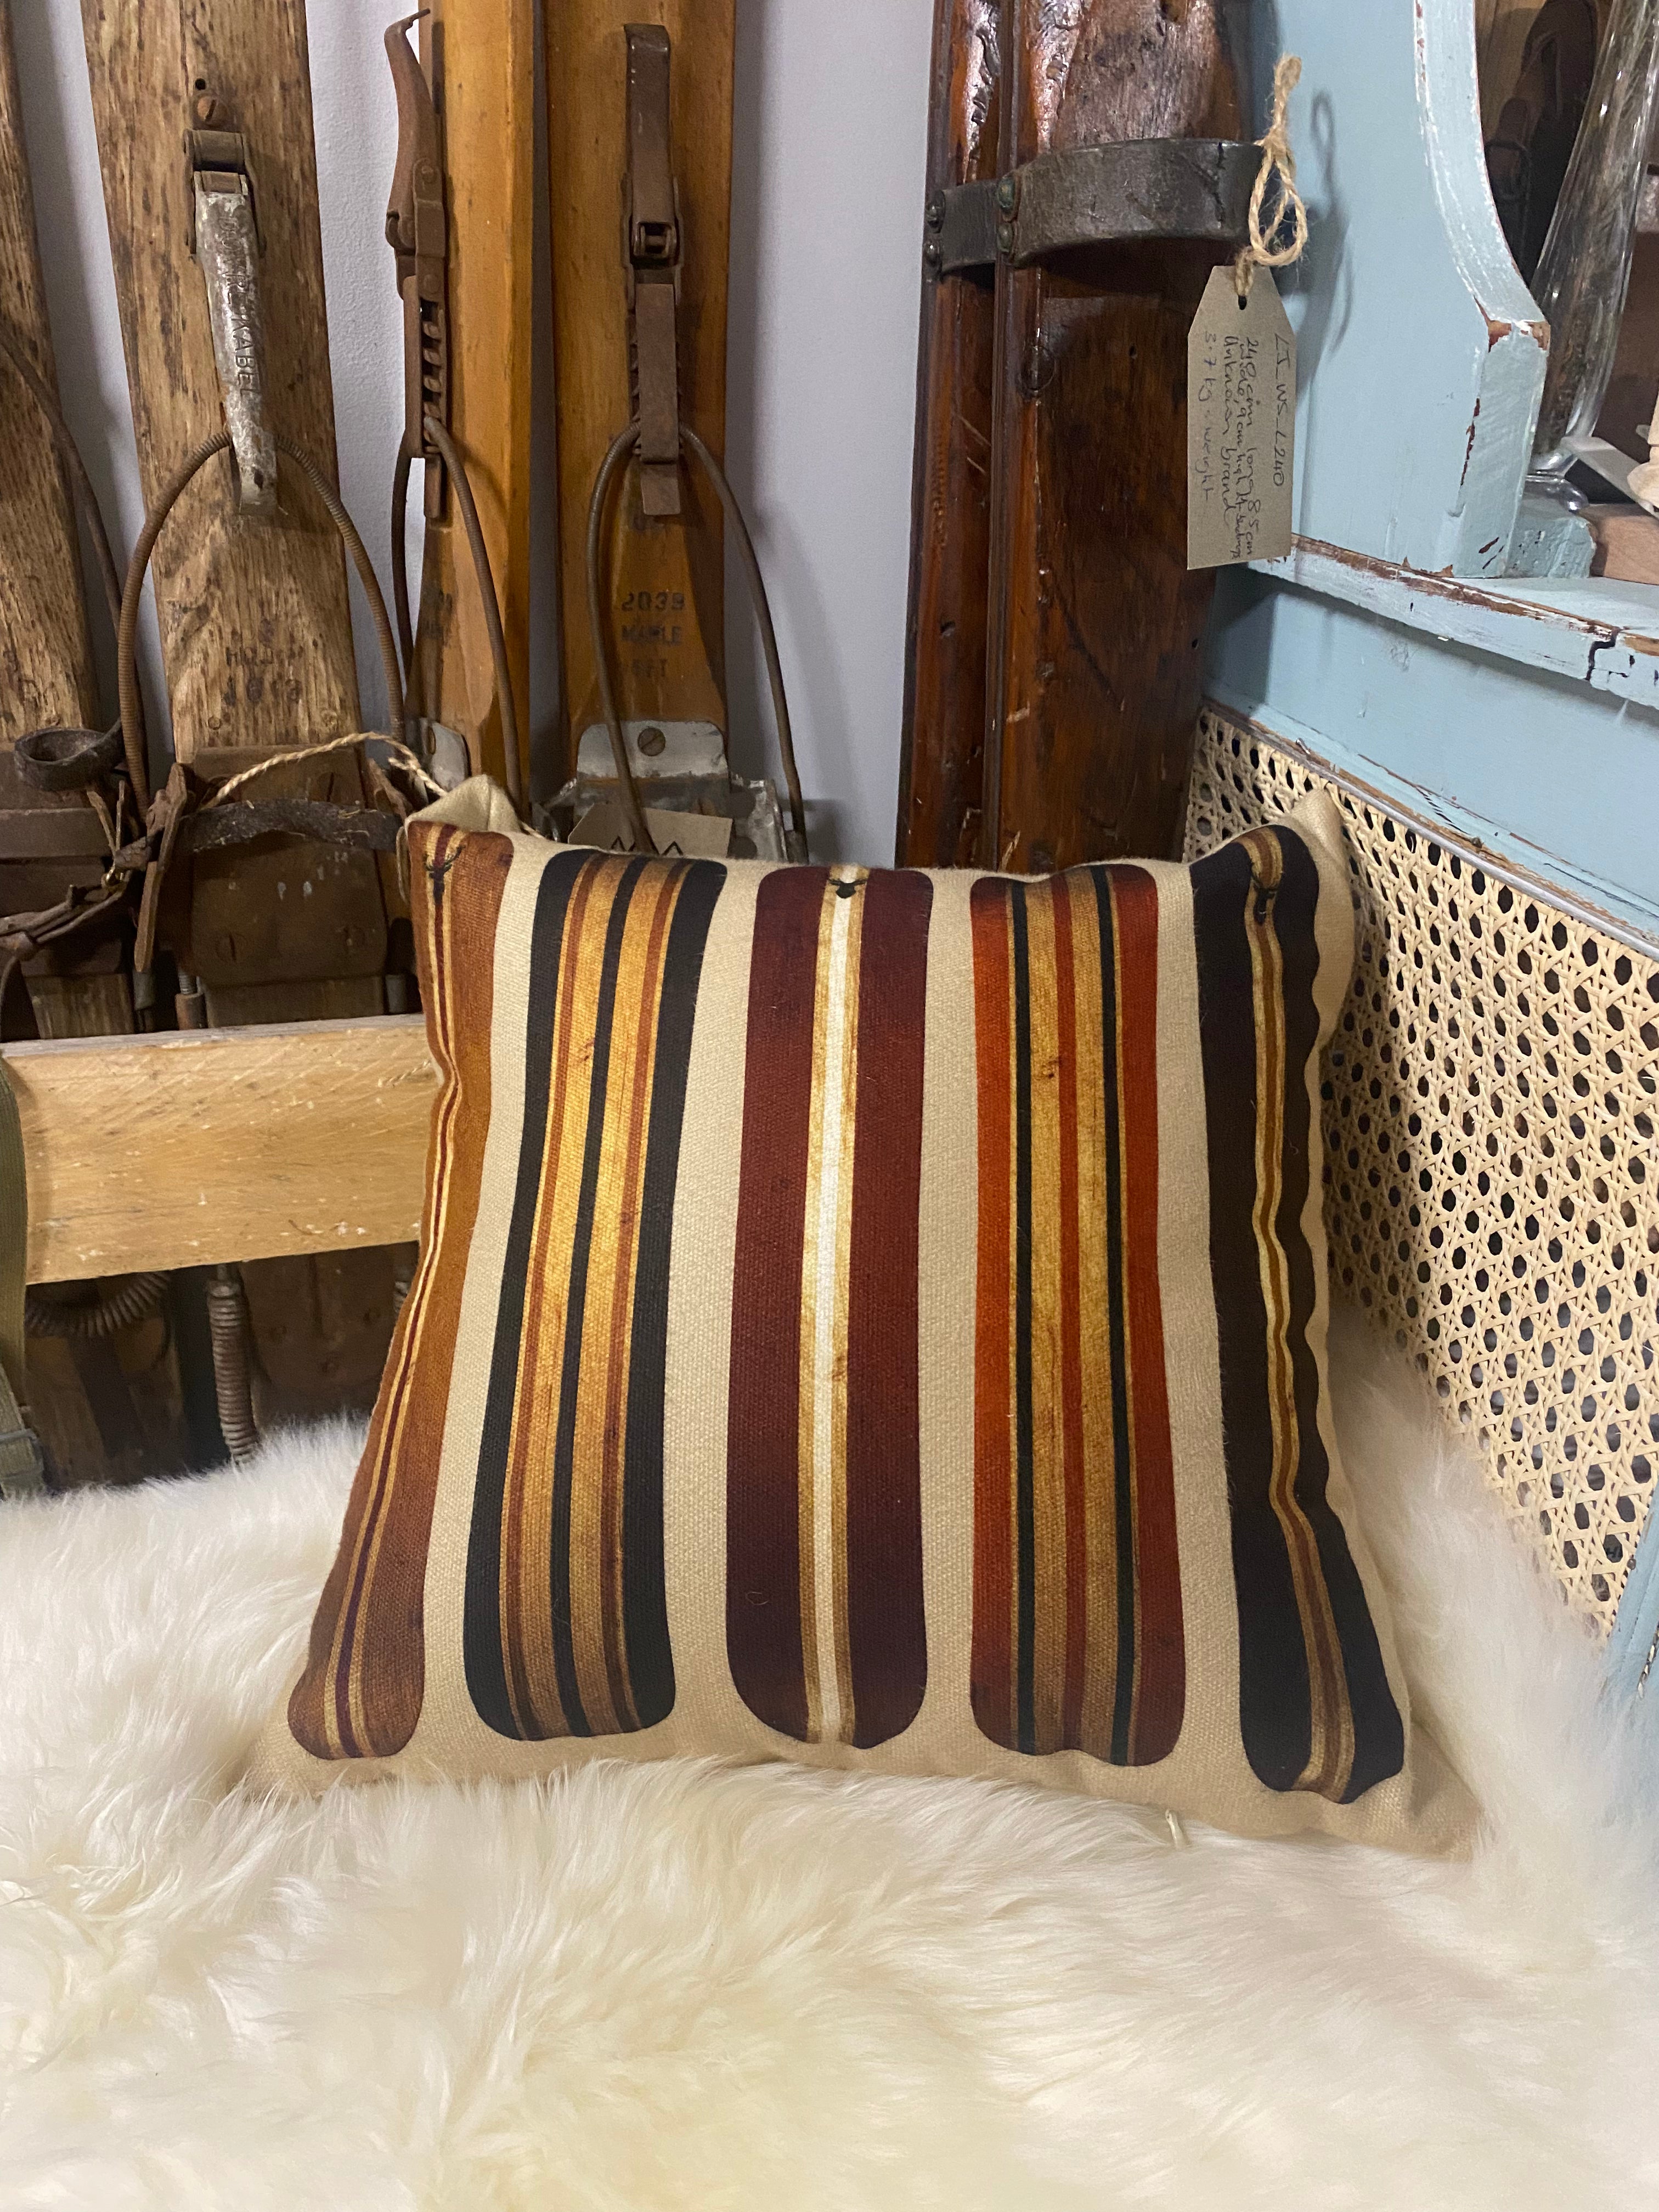 Vintage Style Snowboard Cushion: photo of wooden style striped snowboards on a beige cushion Cushion resting on a white sheepskin, against wooden skis and a blue cupboard